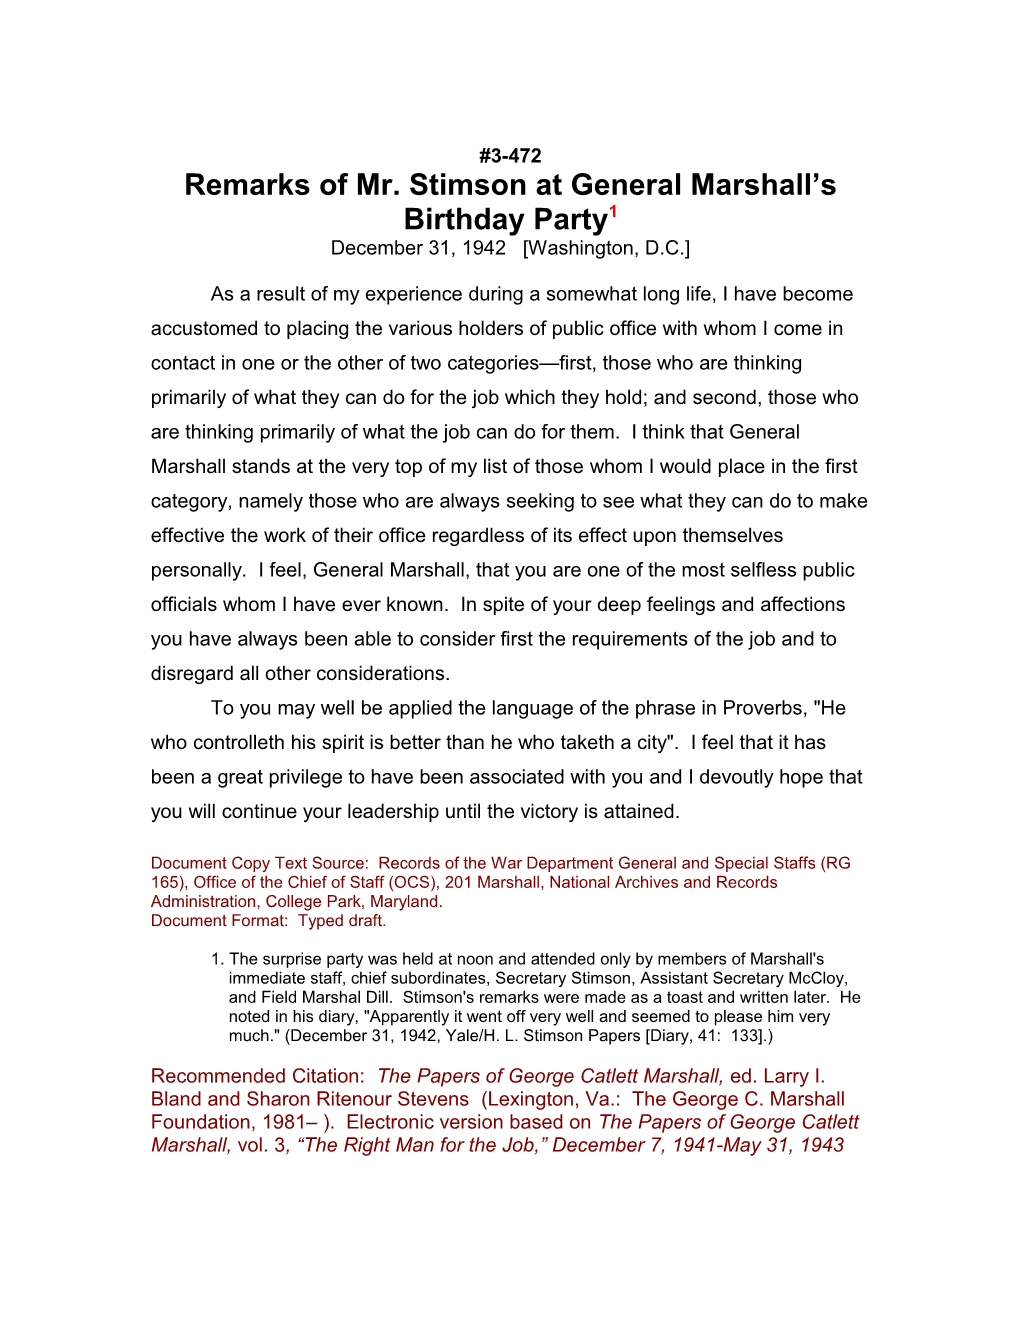 Remarks of Mr. Stimson at General Marshall S Birthday Party1